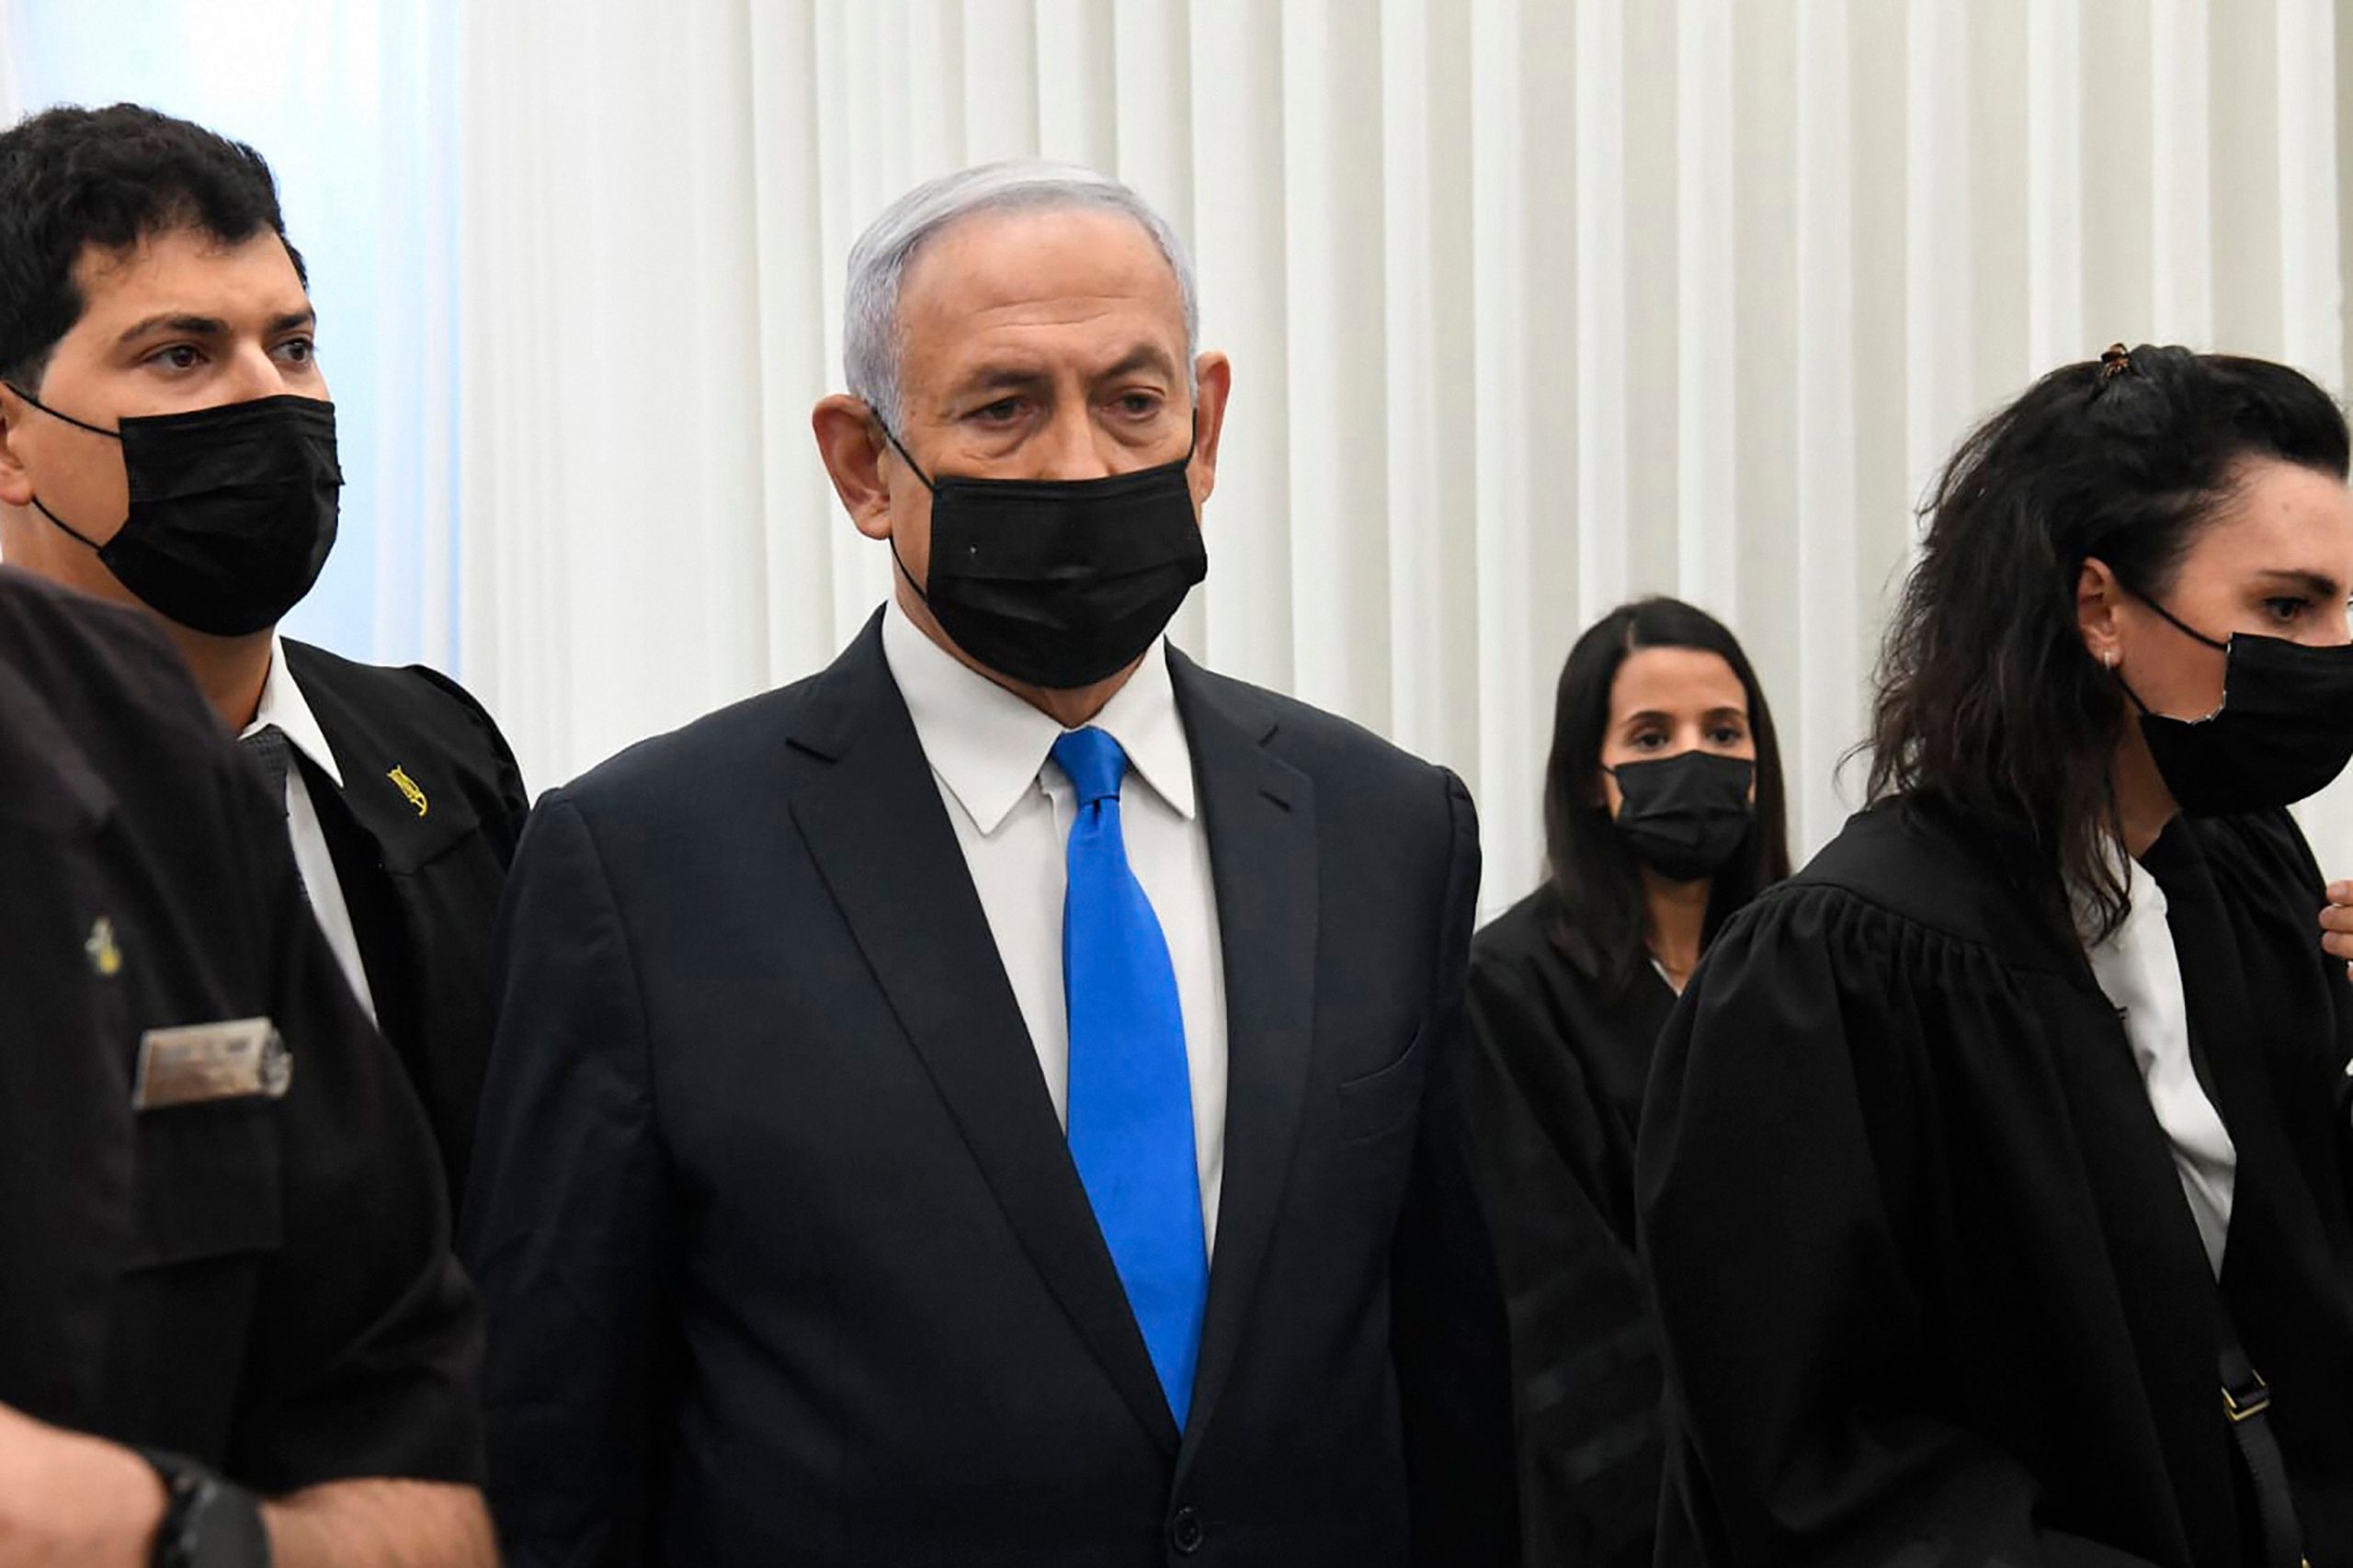 Israeli PM Benjamin Netanyahu denies corruption charges, claims he’s a victim of witch hunt